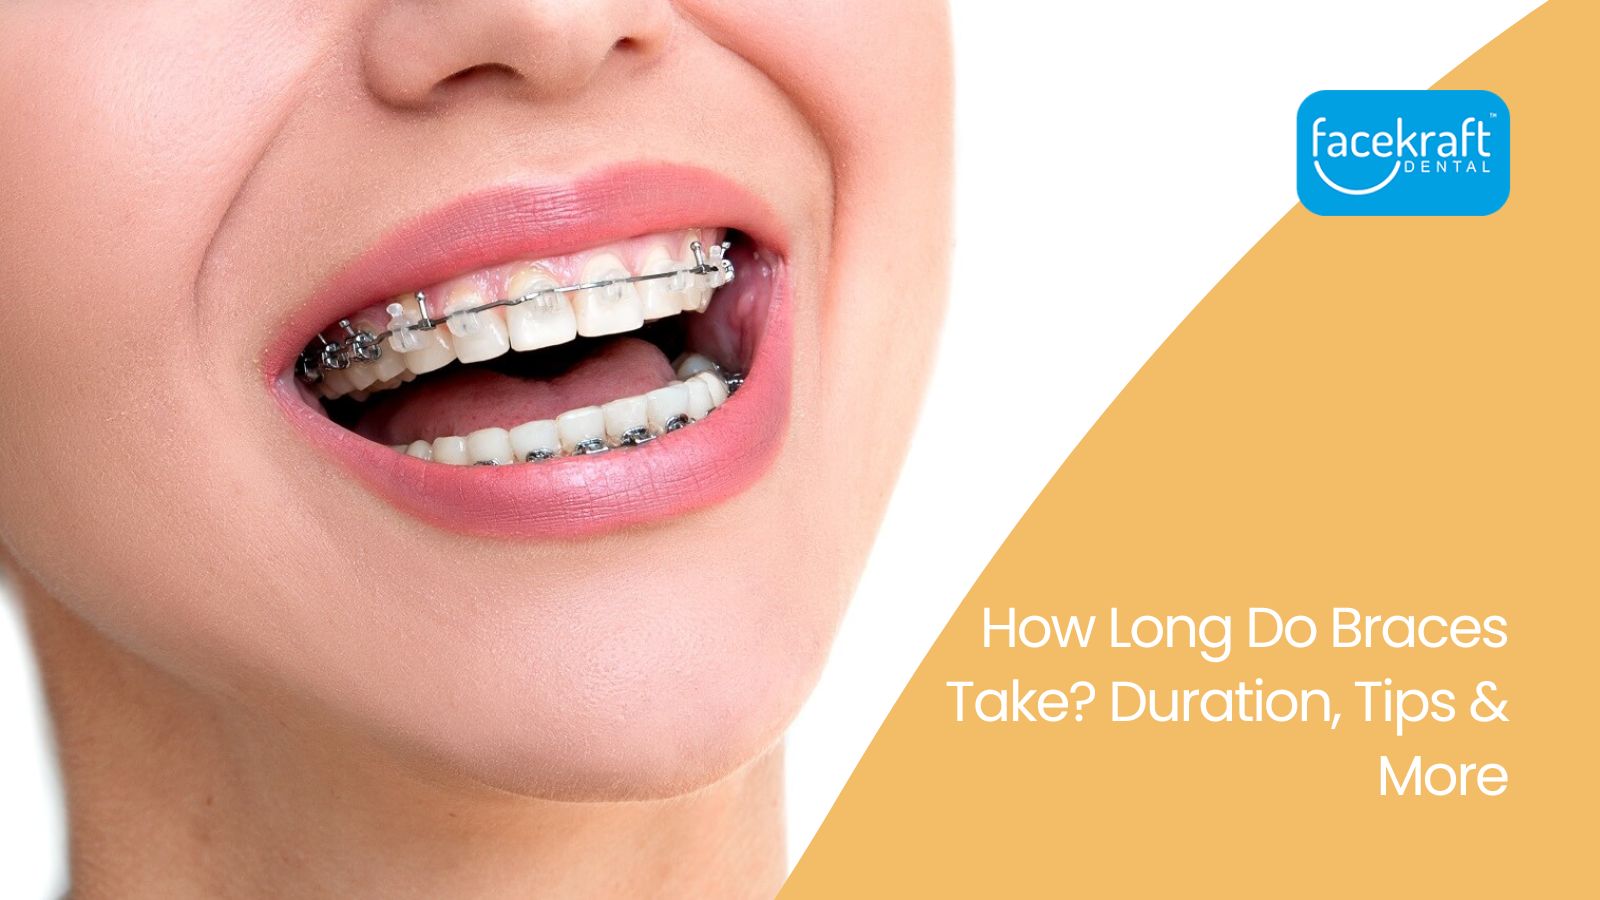 How Long Do Braces Take? Duration, Tips & More